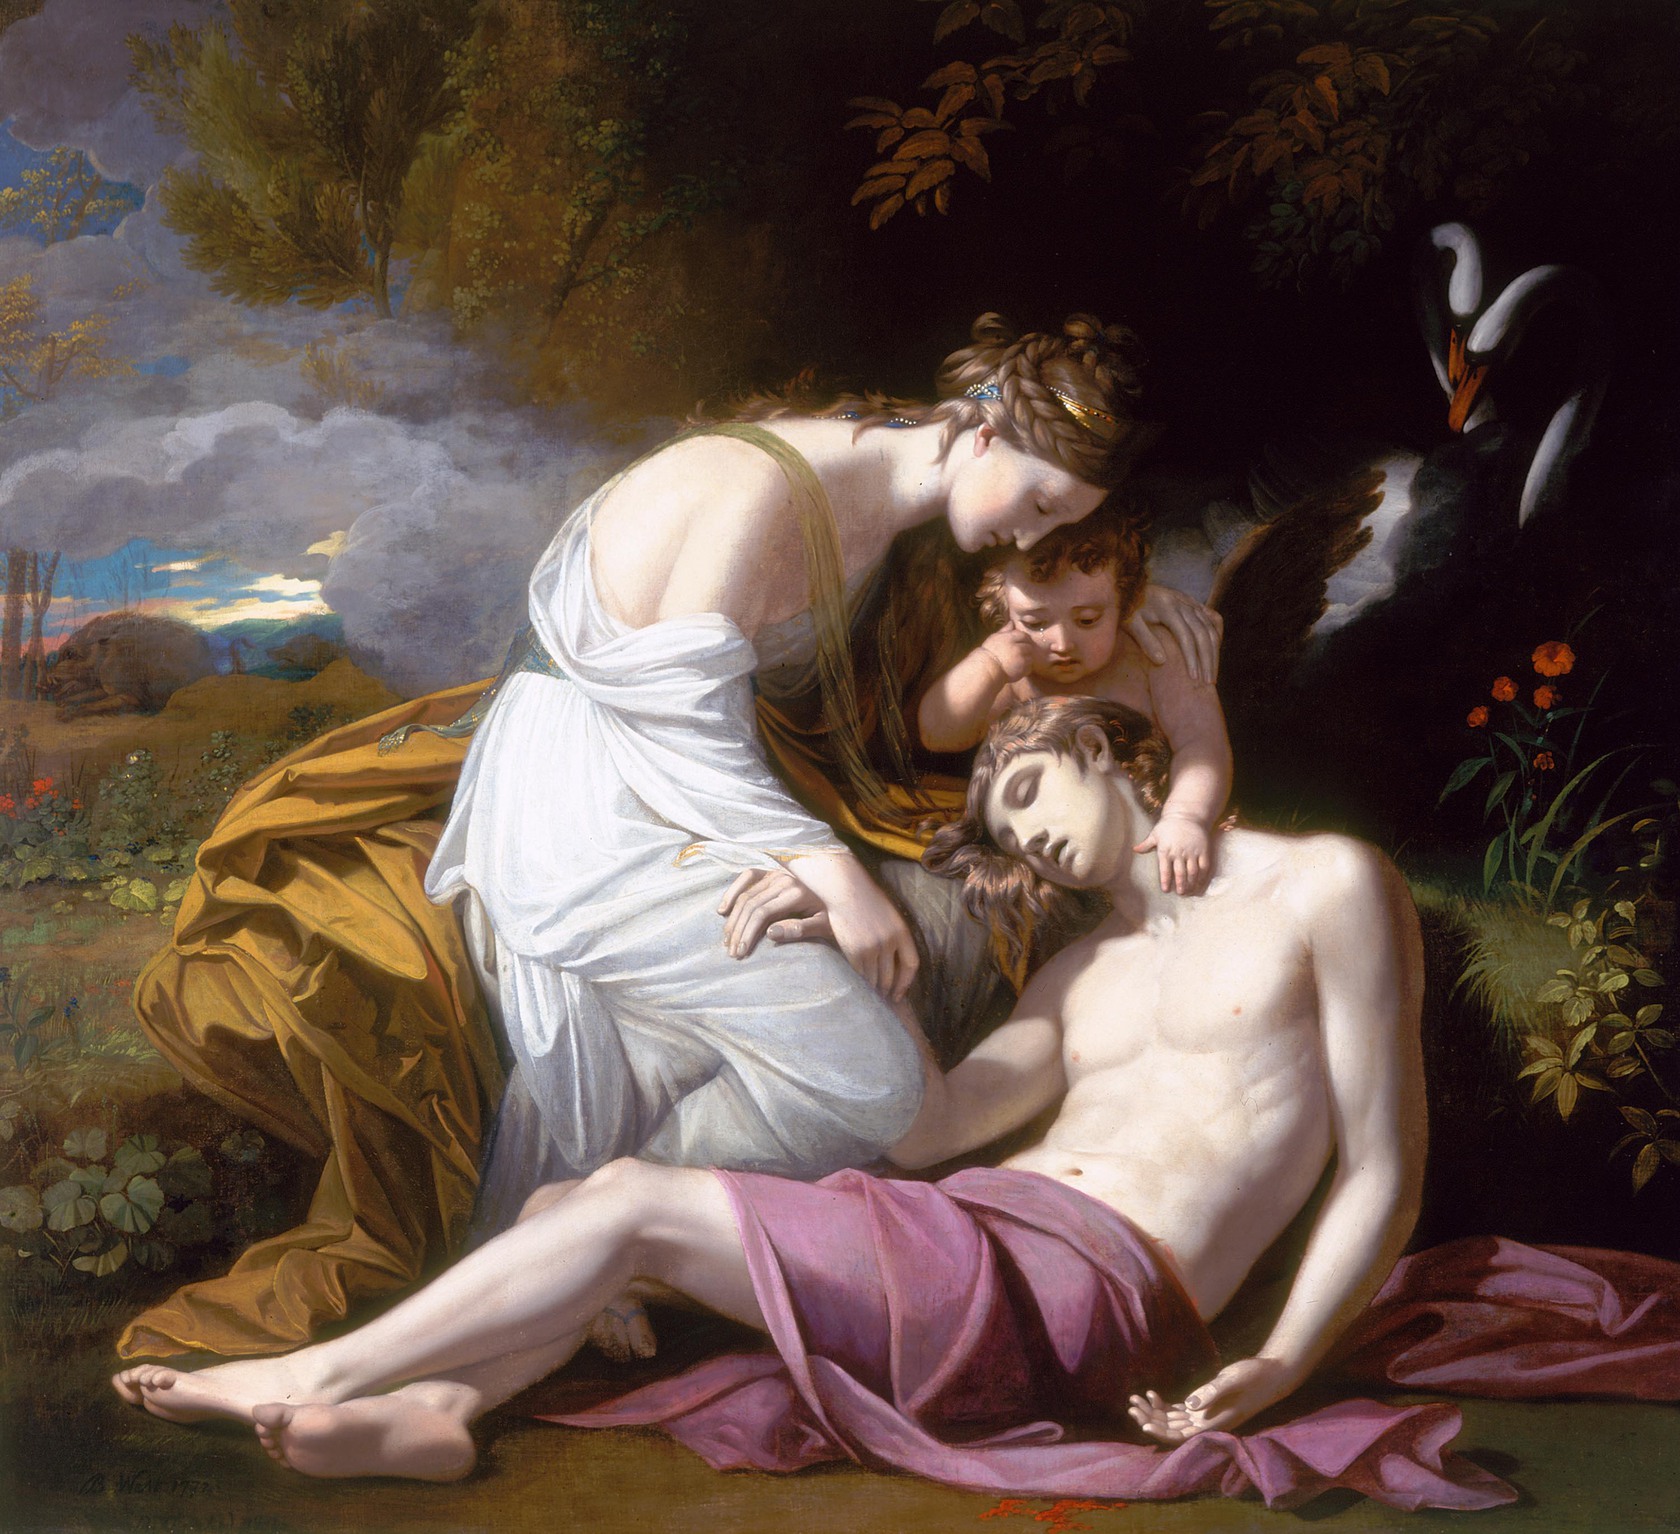 A woman leans over the body of a man in a garden.